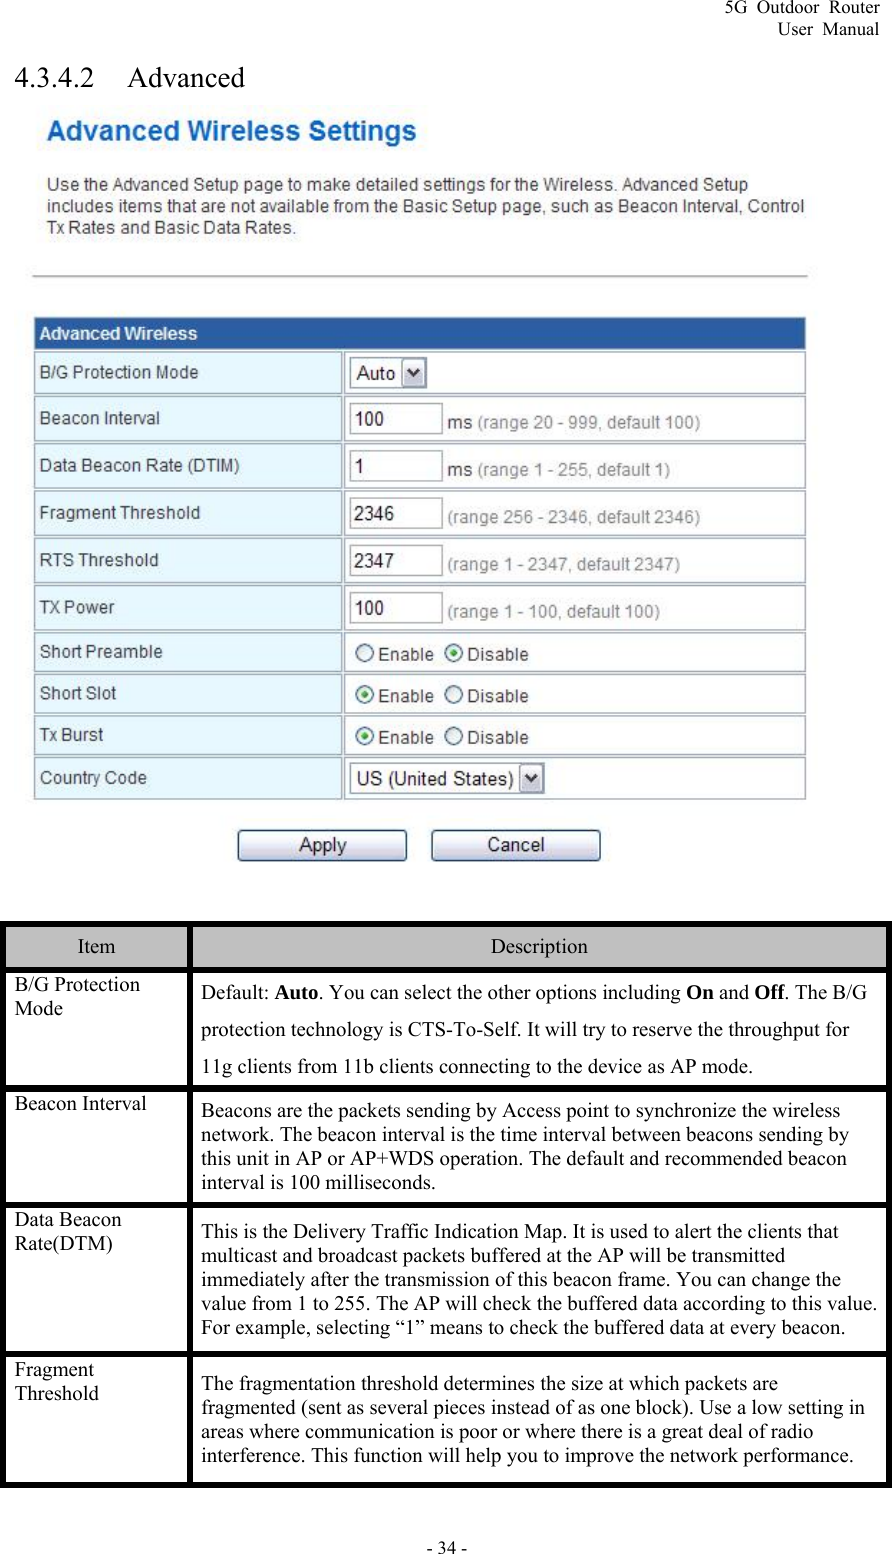 5G Outdoor Router User Manual - 34 - 4.3.4.2 Advanced   Item  Description B/G Protection Mode  Default: Auto. You can select the other options including On and Off. The B/G protection technology is CTS-To-Self. It will try to reserve the throughput for 11g clients from 11b clients connecting to the device as AP mode. Beacon Interval  Beacons are the packets sending by Access point to synchronize the wireless network. The beacon interval is the time interval between beacons sending by this unit in AP or AP+WDS operation. The default and recommended beacon interval is 100 milliseconds. Data Beacon Rate(DTM)  This is the Delivery Traffic Indication Map. It is used to alert the clients that multicast and broadcast packets buffered at the AP will be transmitted immediately after the transmission of this beacon frame. You can change the value from 1 to 255. The AP will check the buffered data according to this value. For example, selecting “1” means to check the buffered data at every beacon. Fragment Threshold  The fragmentation threshold determines the size at which packets are fragmented (sent as several pieces instead of as one block). Use a low setting in areas where communication is poor or where there is a great deal of radio interference. This function will help you to improve the network performance. 